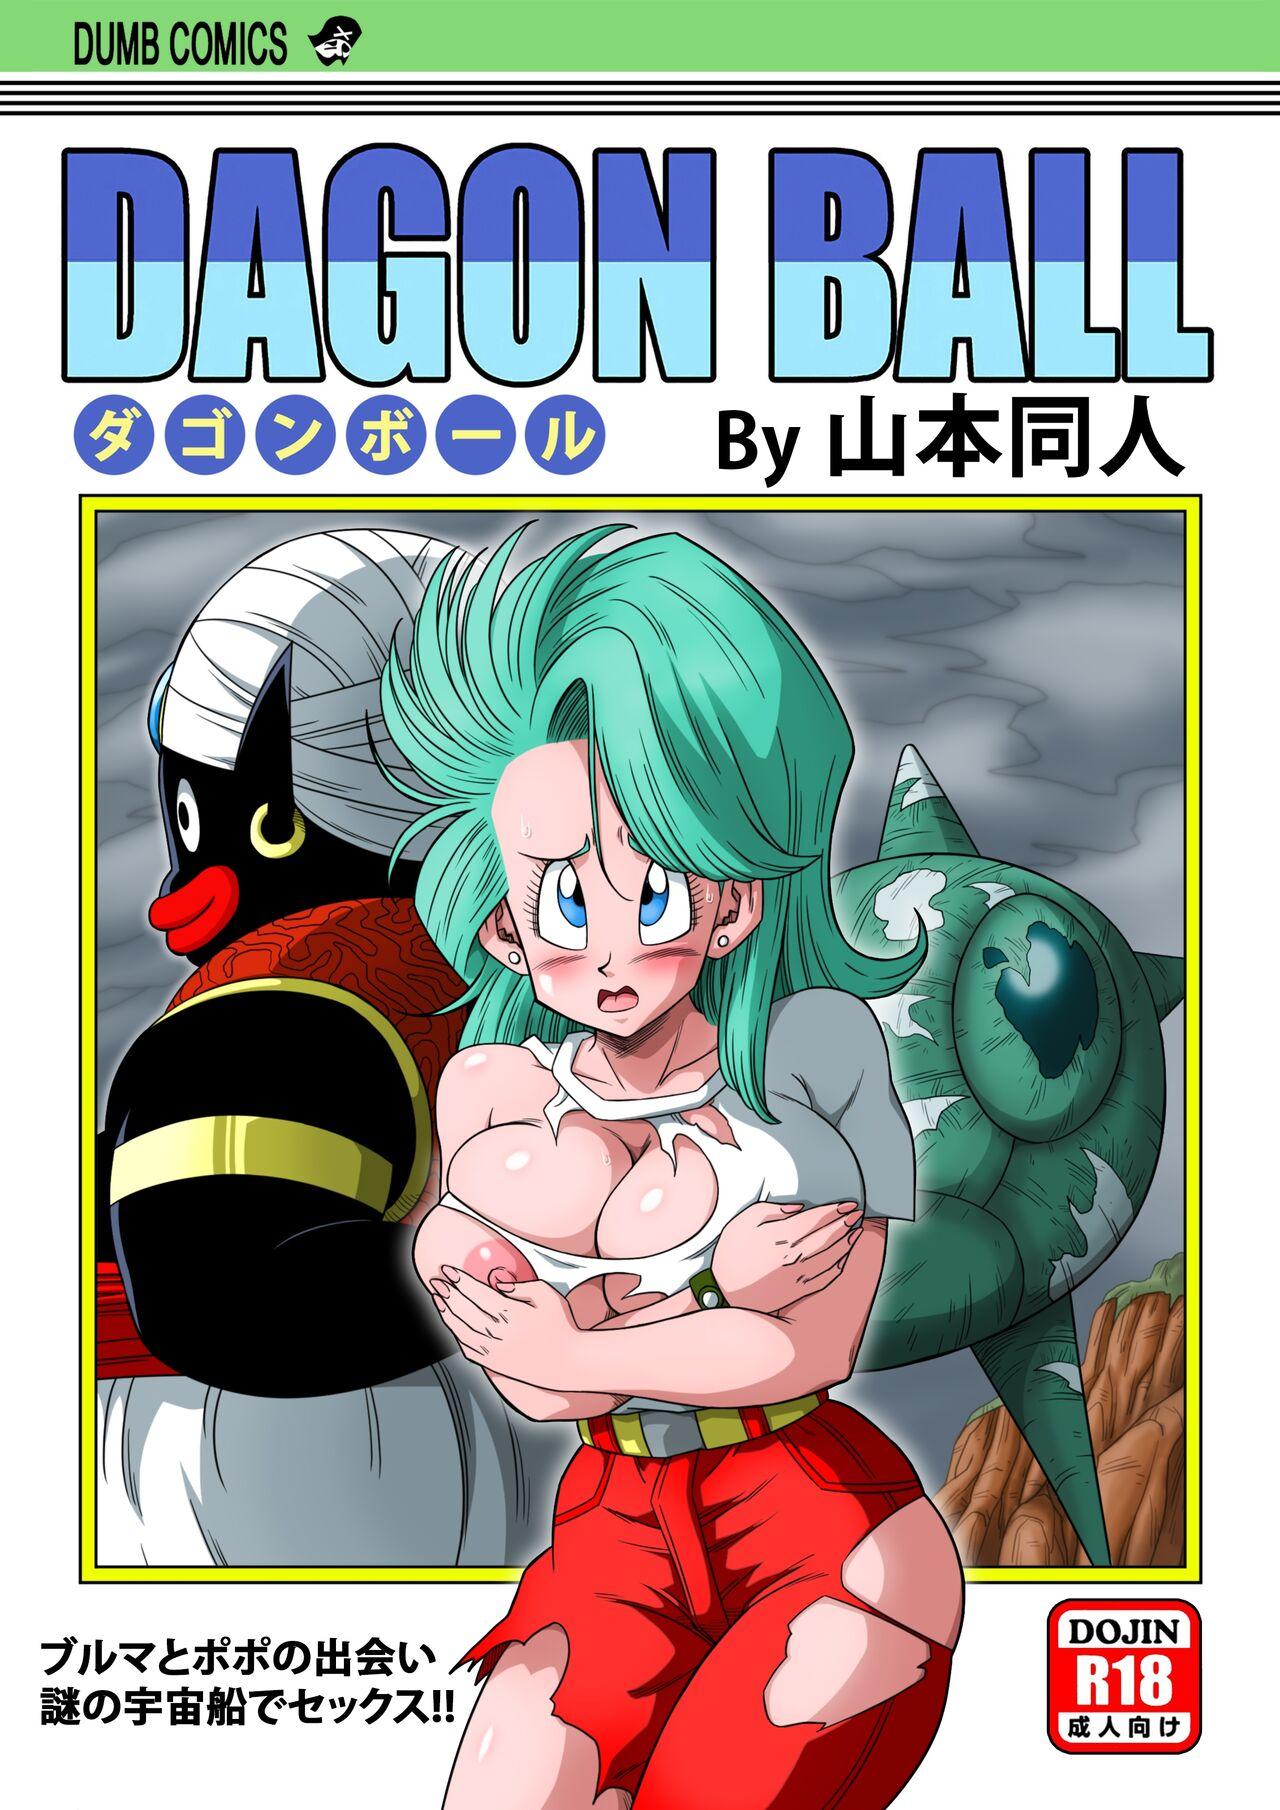 Cameltoe Bulma Meets Mr.Popo - Sex inside the Mysterious Spaceship! - Dragon ball z Daring - Picture 1